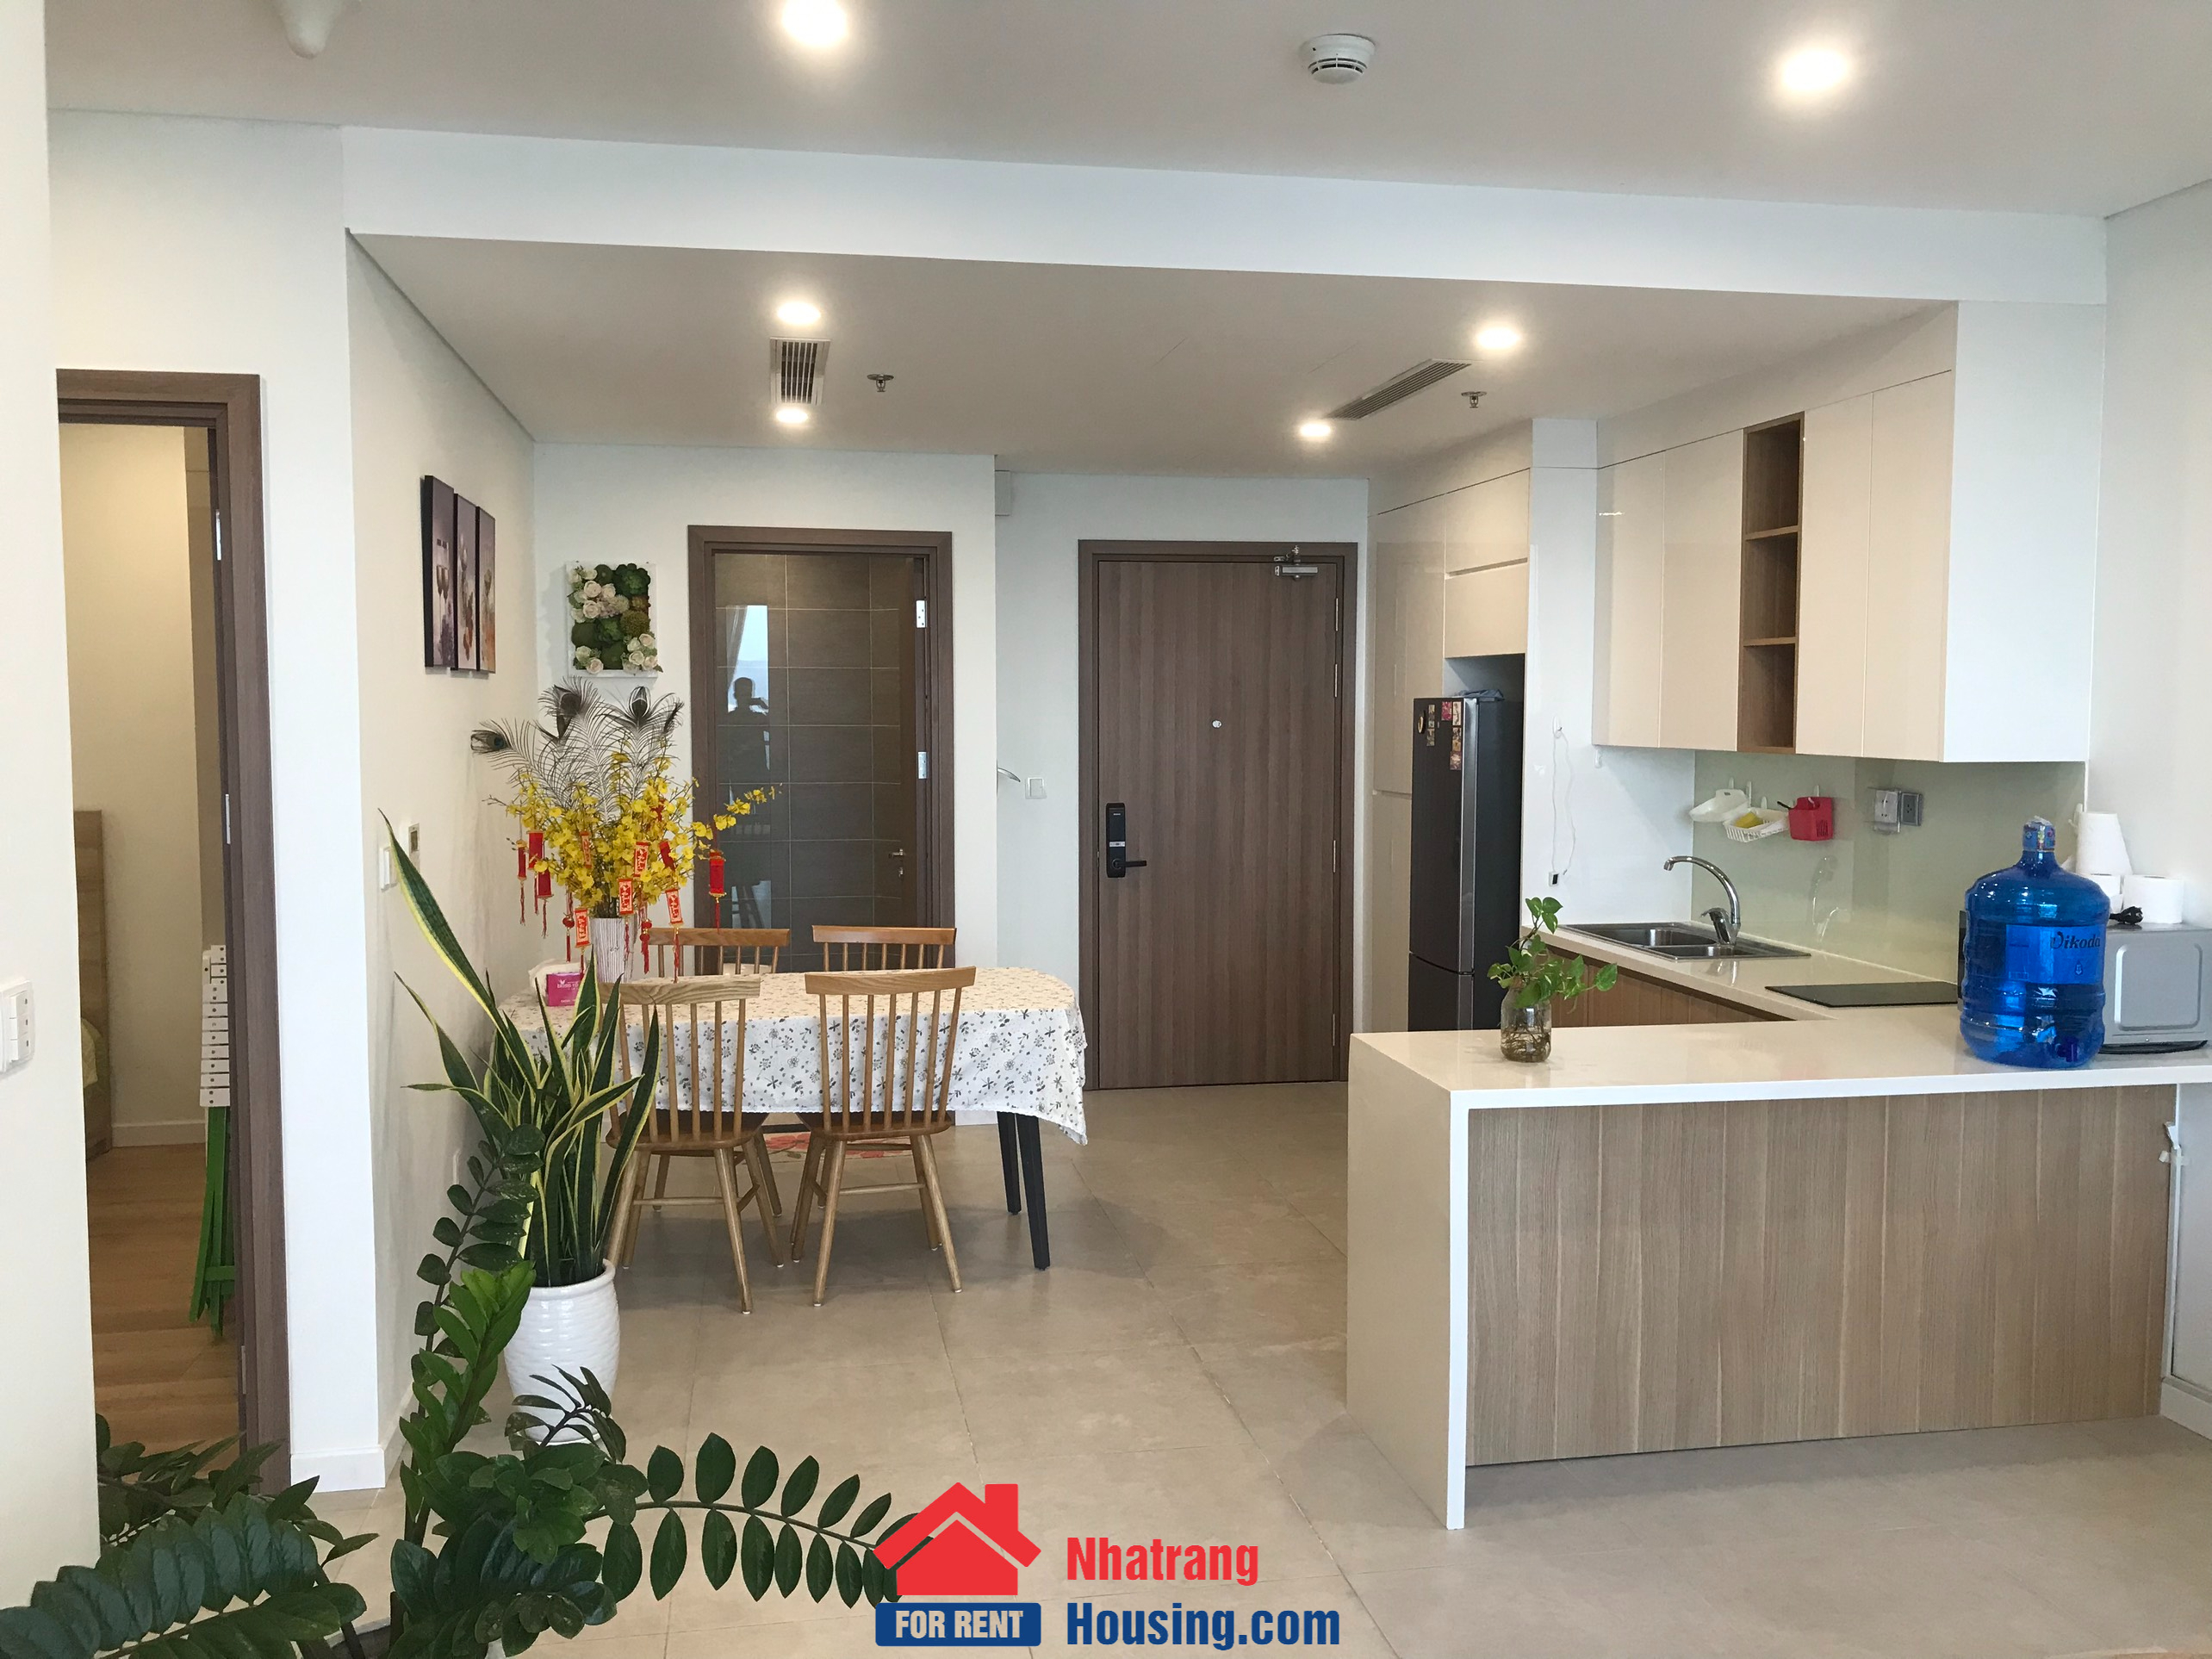 Scenia Bay Nha Trang for rent | Two bedrooms | Sea view | 22 million VND